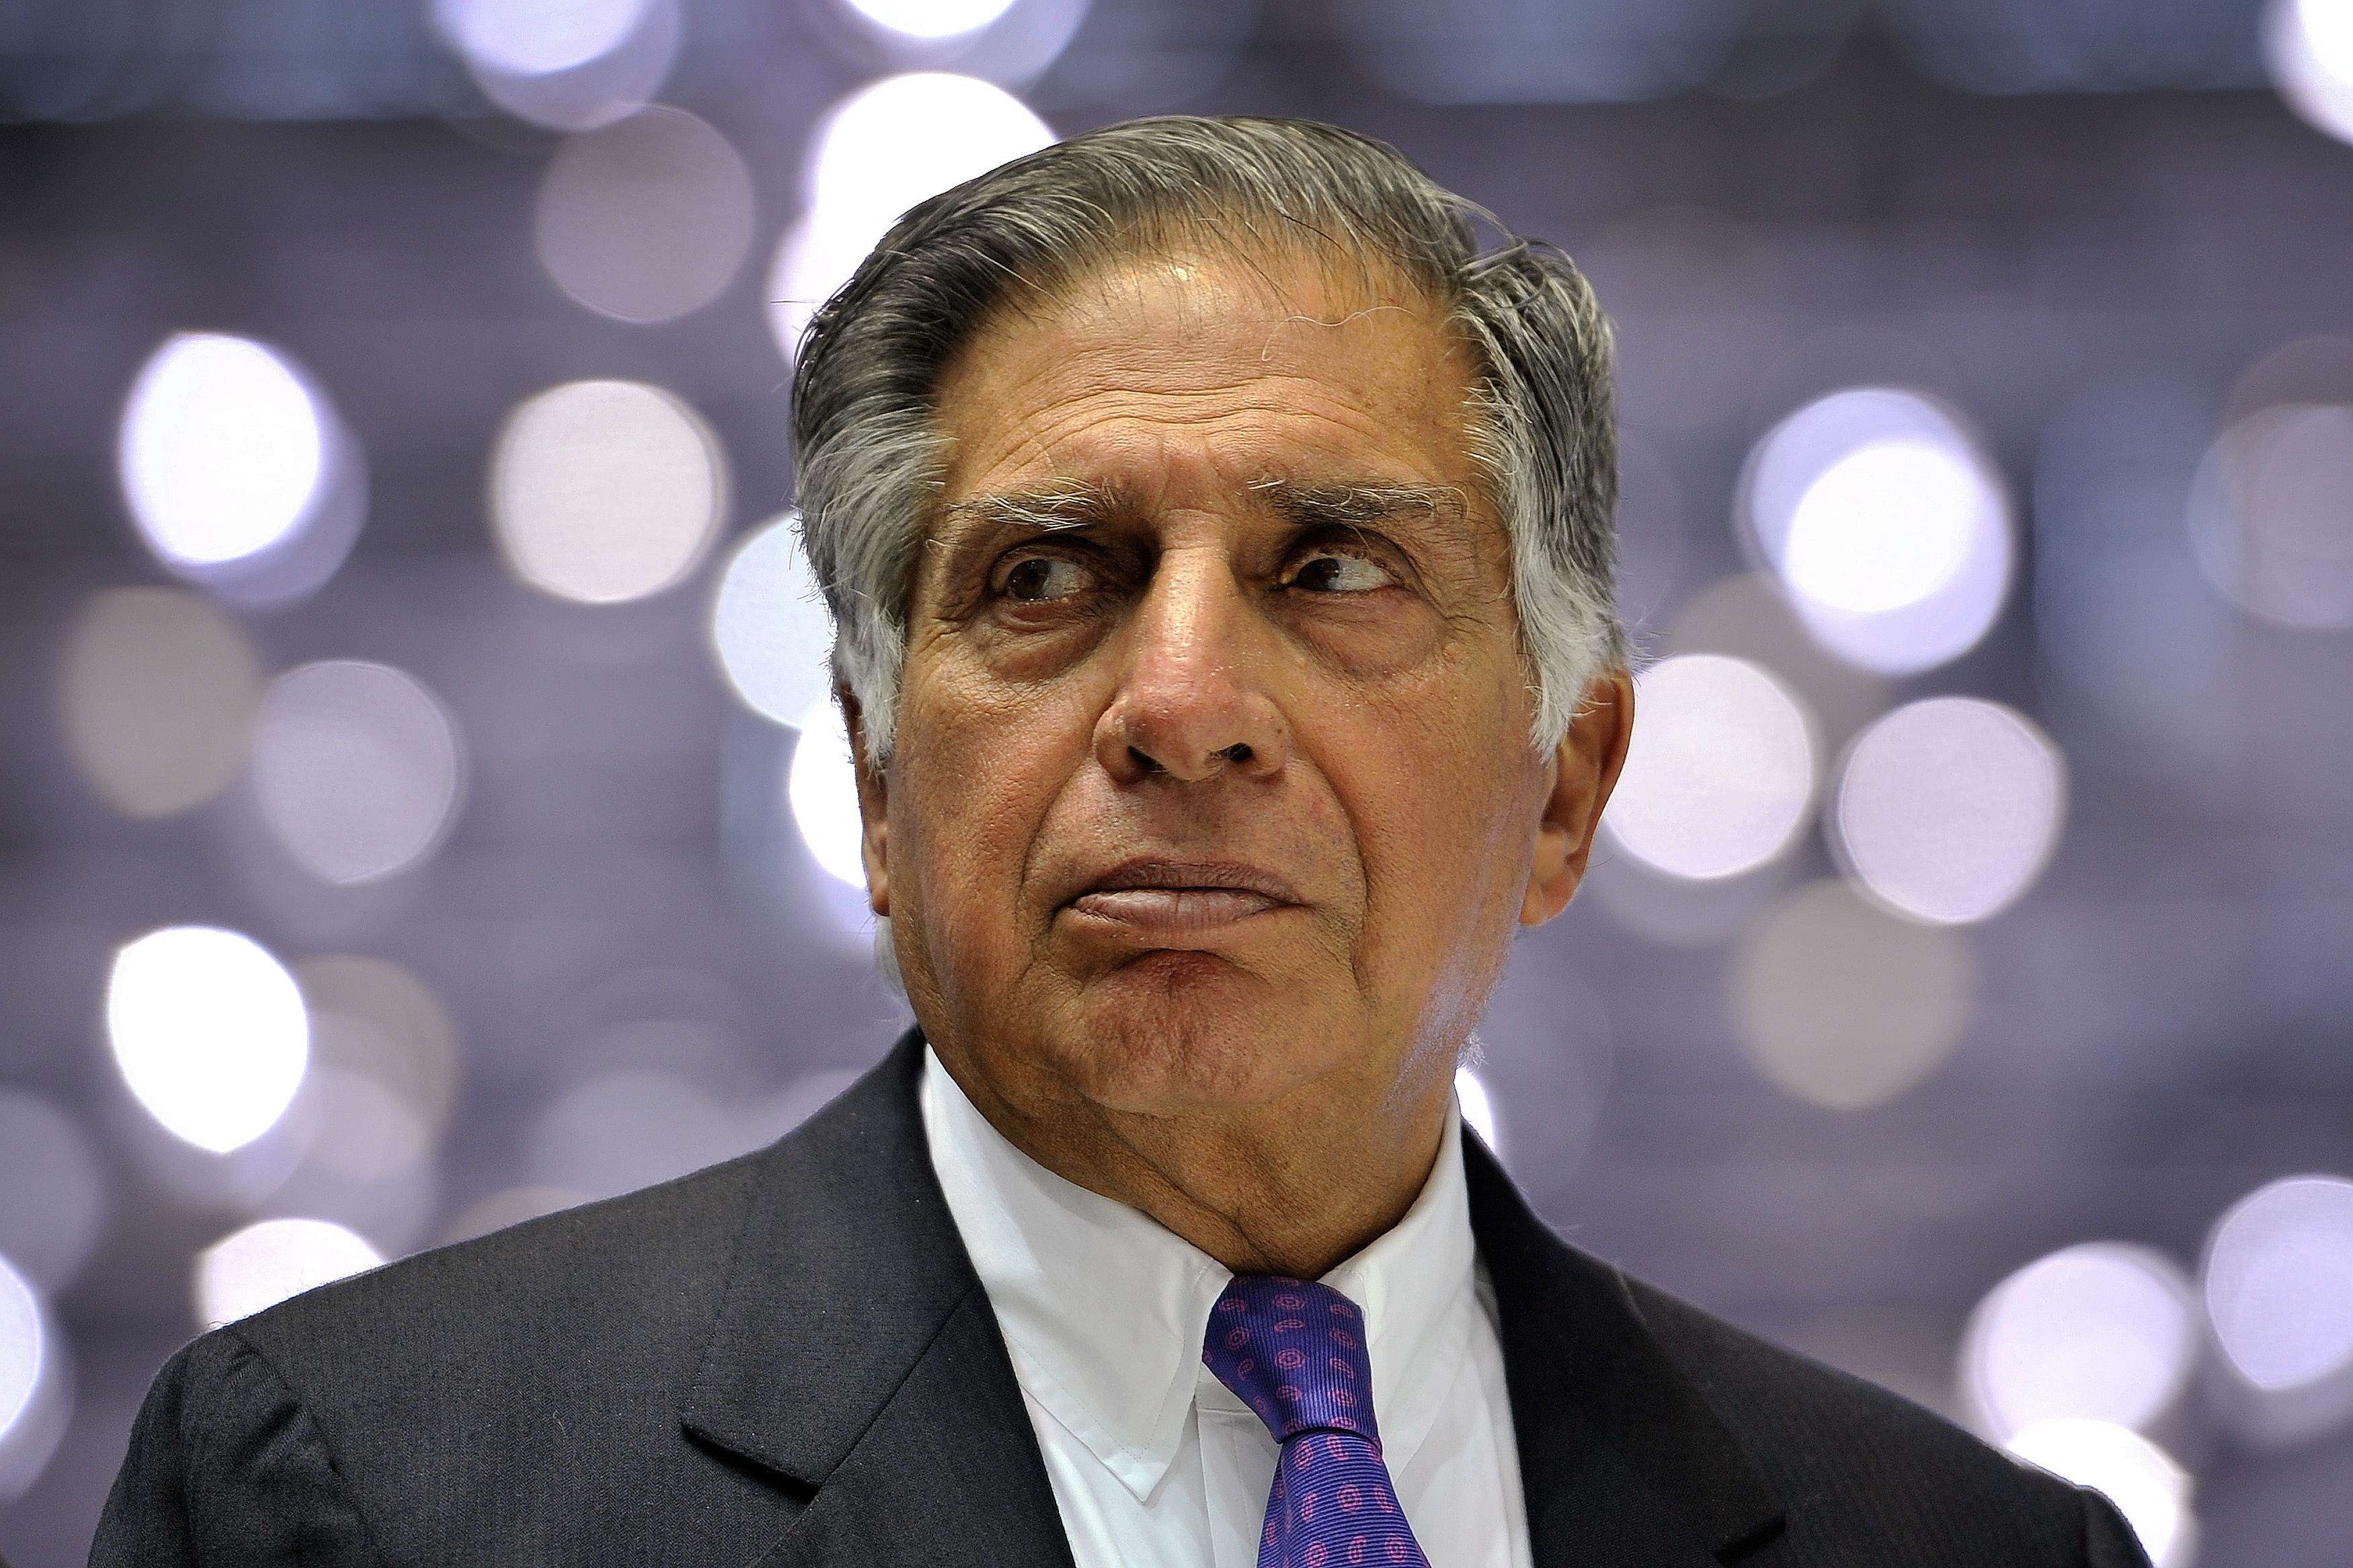 Ratan Tata, chairman of Tata and Allied Trusts, will take over as head of Tata Group after Cyrus Mistry was stood down by the firm’s board this week. Photo: AFP